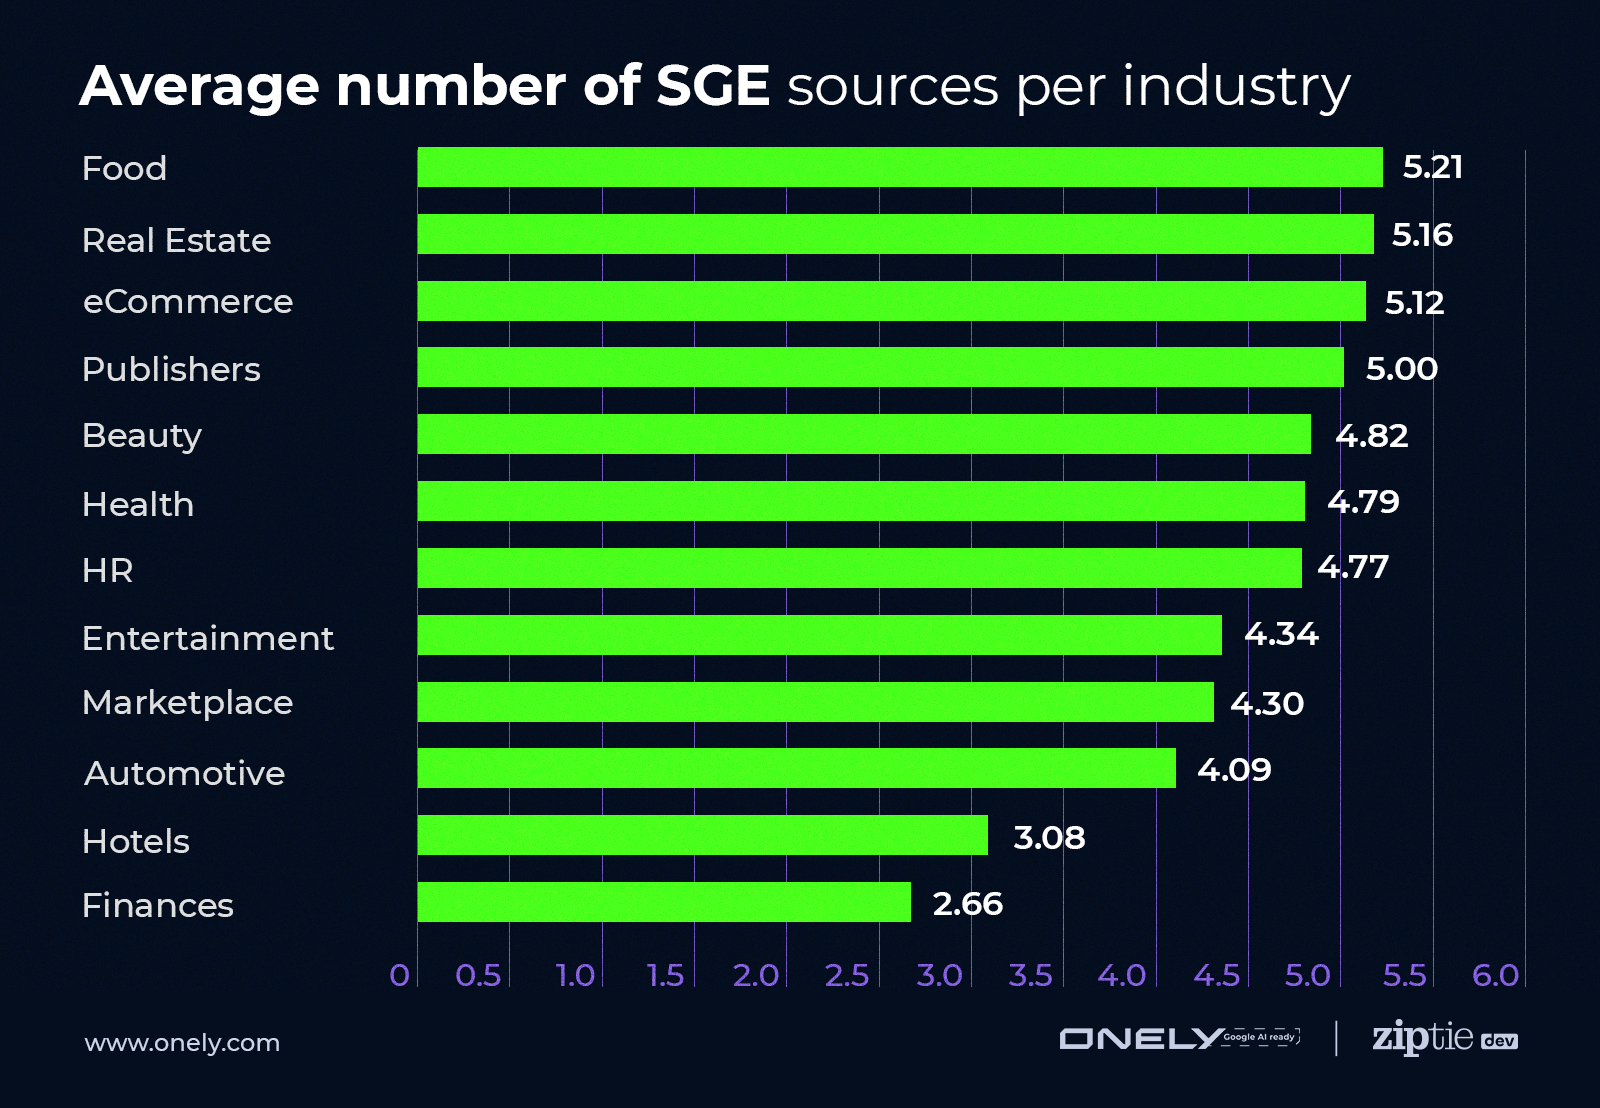 Average number of SGE sources per industry